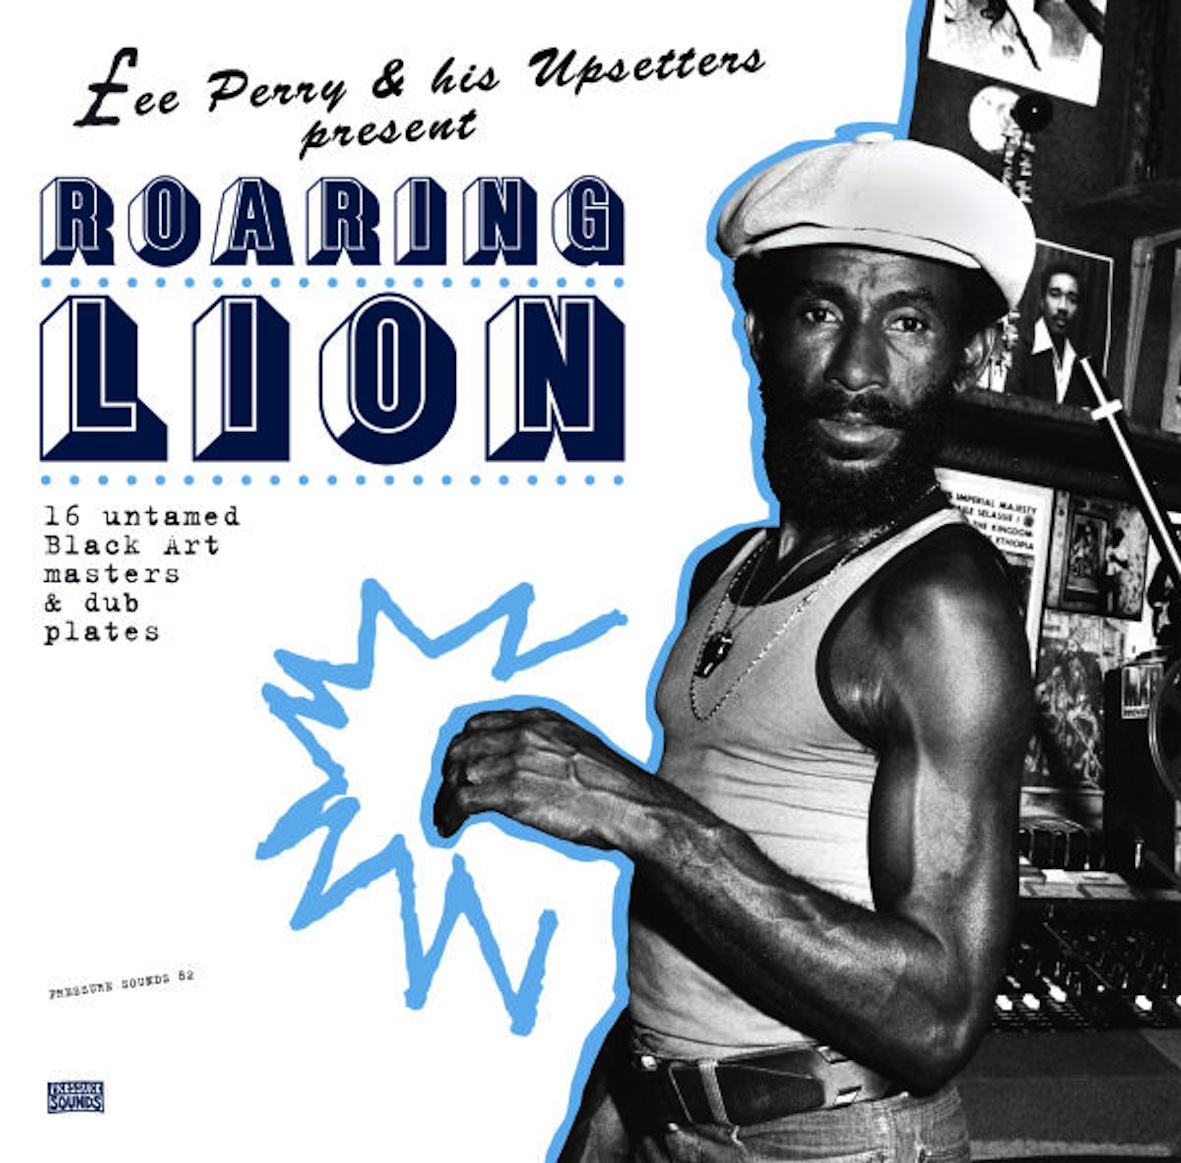 Test Pressing, Reviews, Dr Rob, Lee Perry, The Upsetters, Pressure Sounds, Pete Holdsworth, Adrian Sherwood, ON-U Sound, Adrian Boot, Roaring Lion